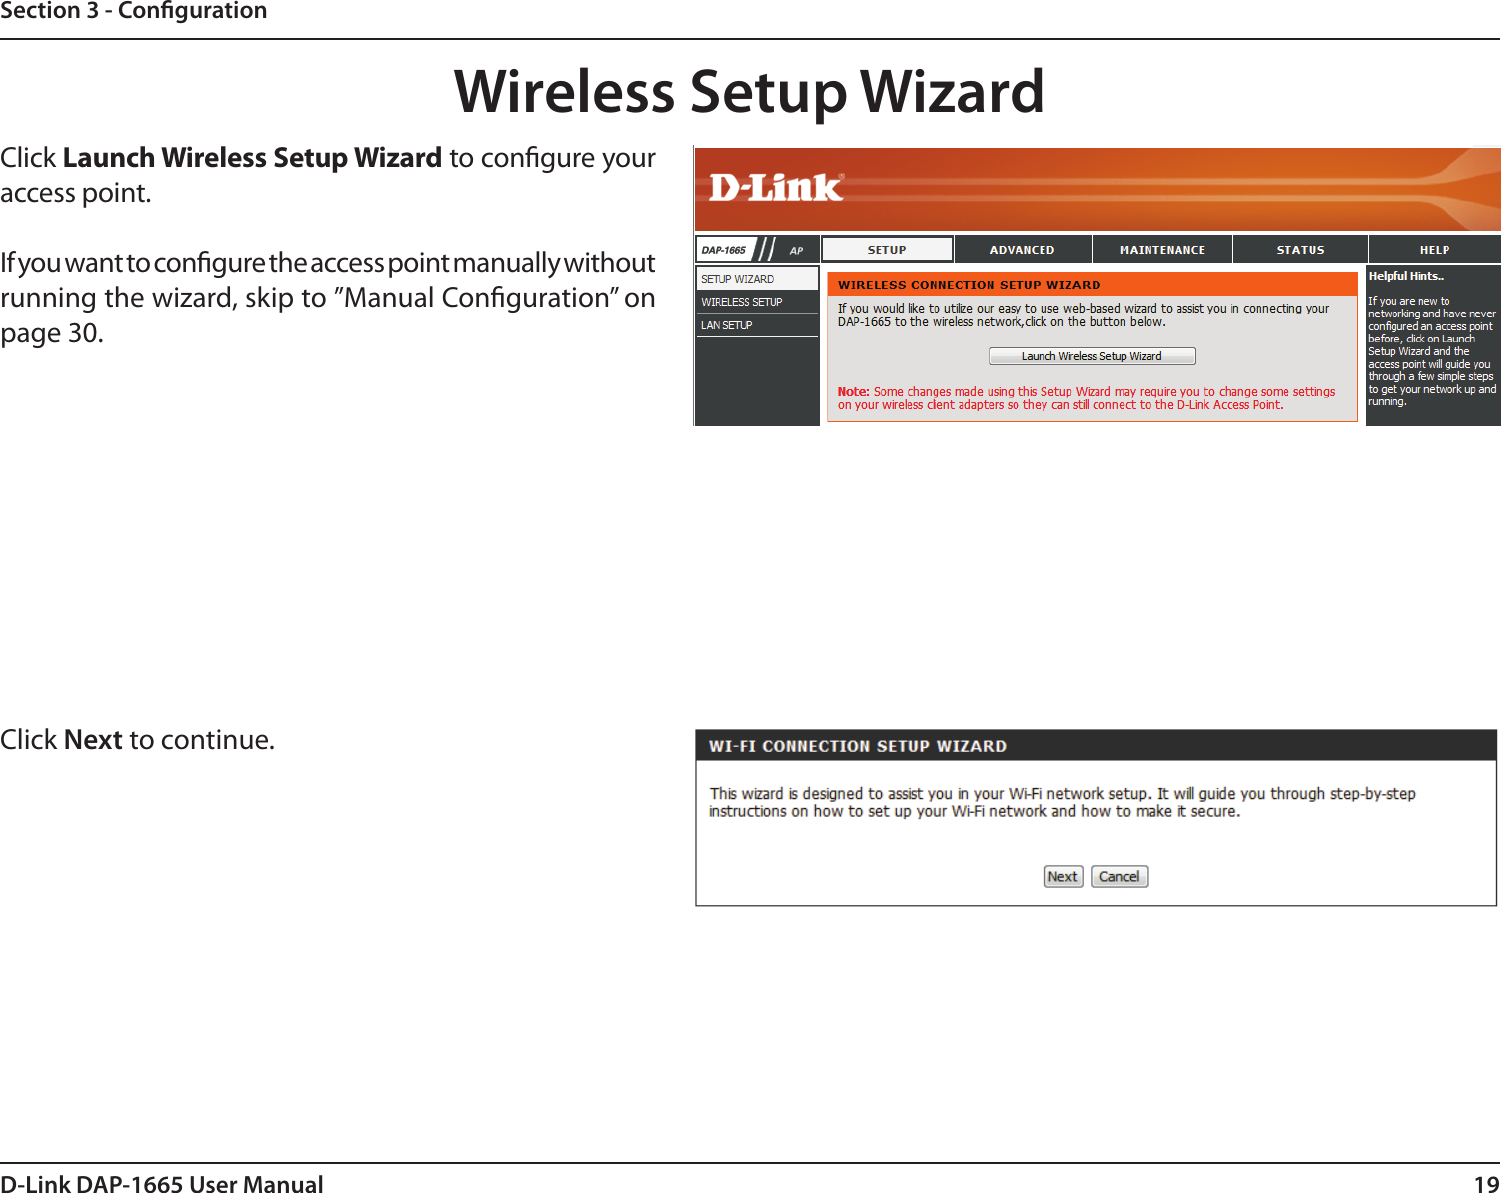 19D-Link DAP-1665 User ManualSection 3 - CongurationClick Launch Wireless Setup Wizard to congure your access point.If you want to congure the access point manually without running the wizard, skip to ”Manual Conguration” on page 30.Wireless Setup WizardClick Next to continue. 